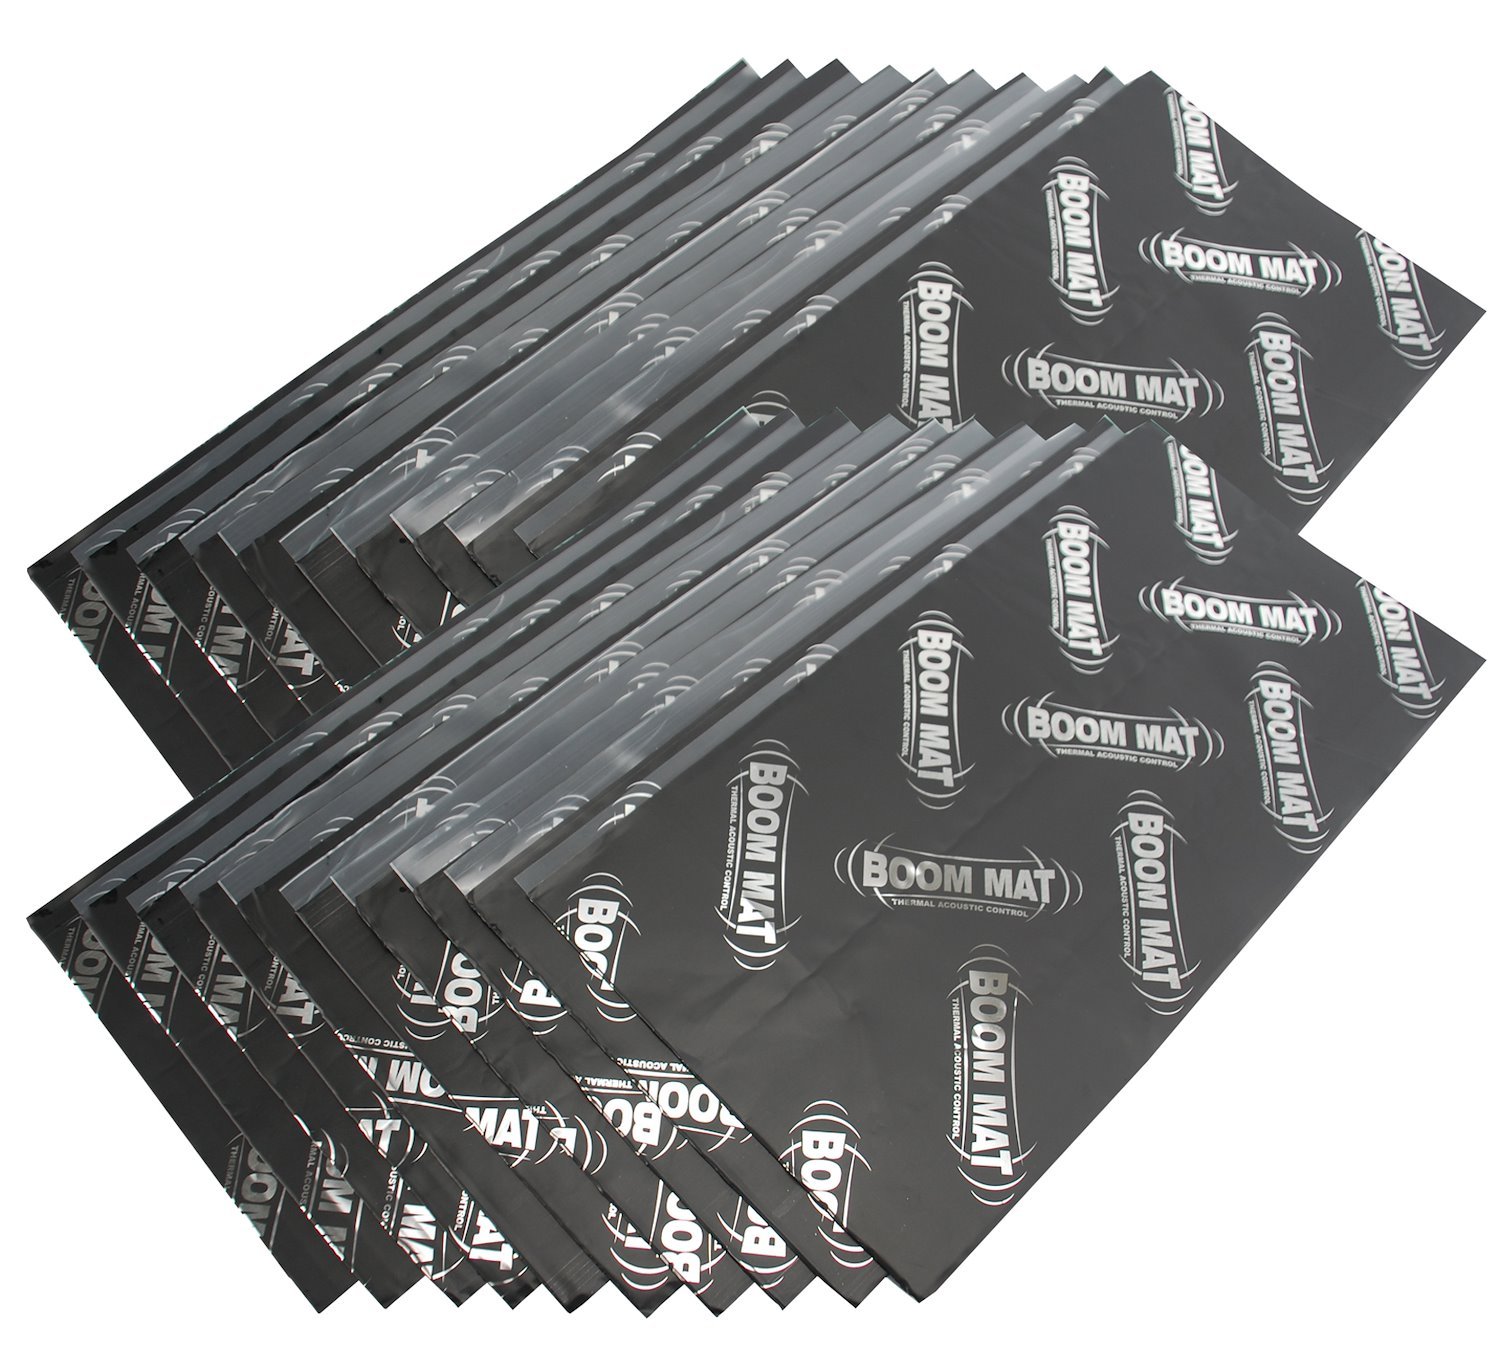 2-Pack Boom Mat Two 24